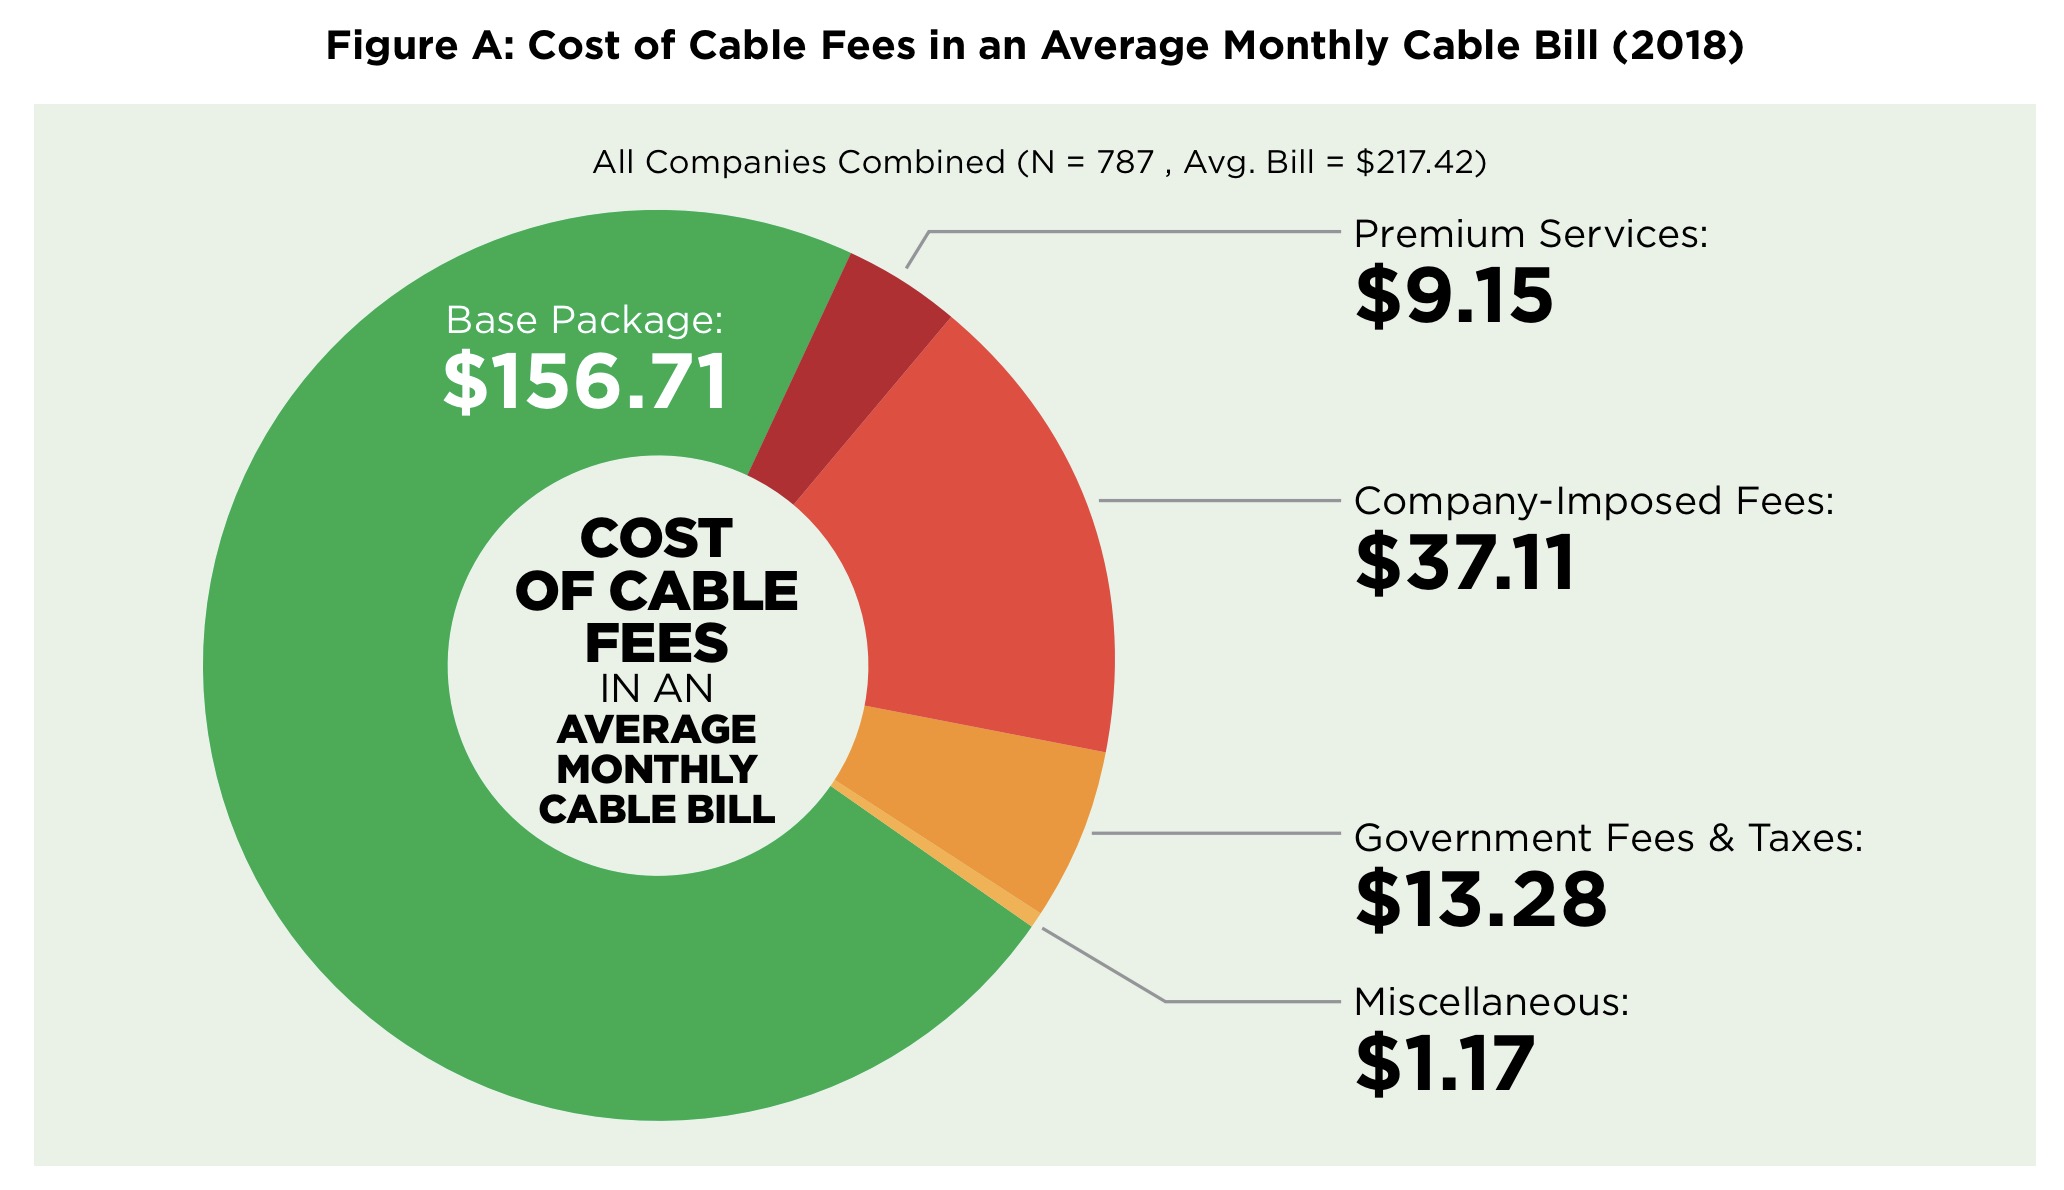  Fees and Pricing